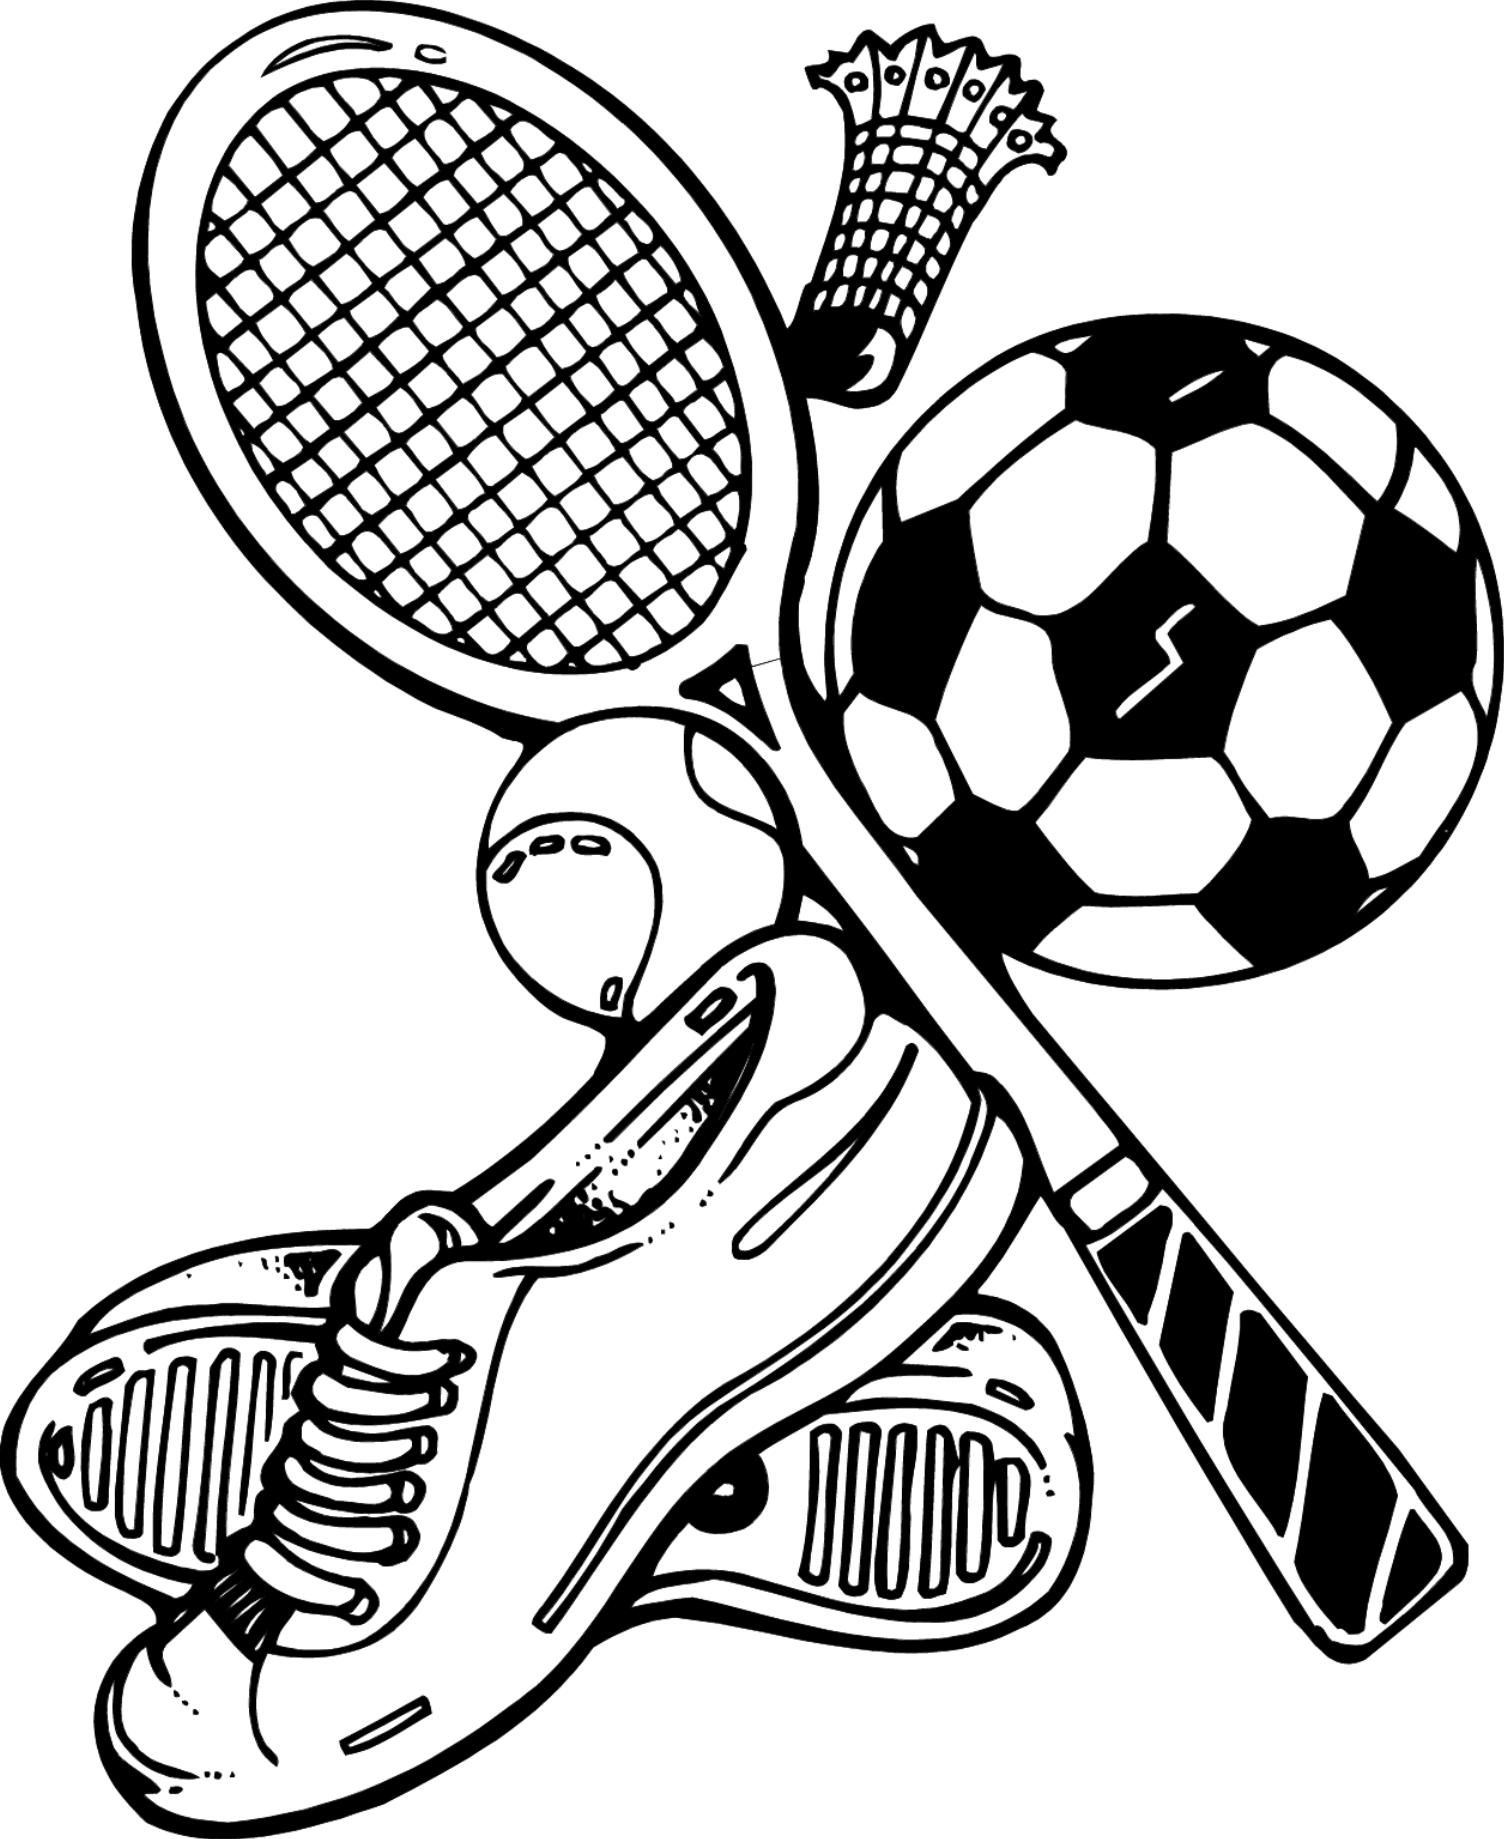 Images Of Sports Equipment | Free Download Clip Art | Free Clip ...